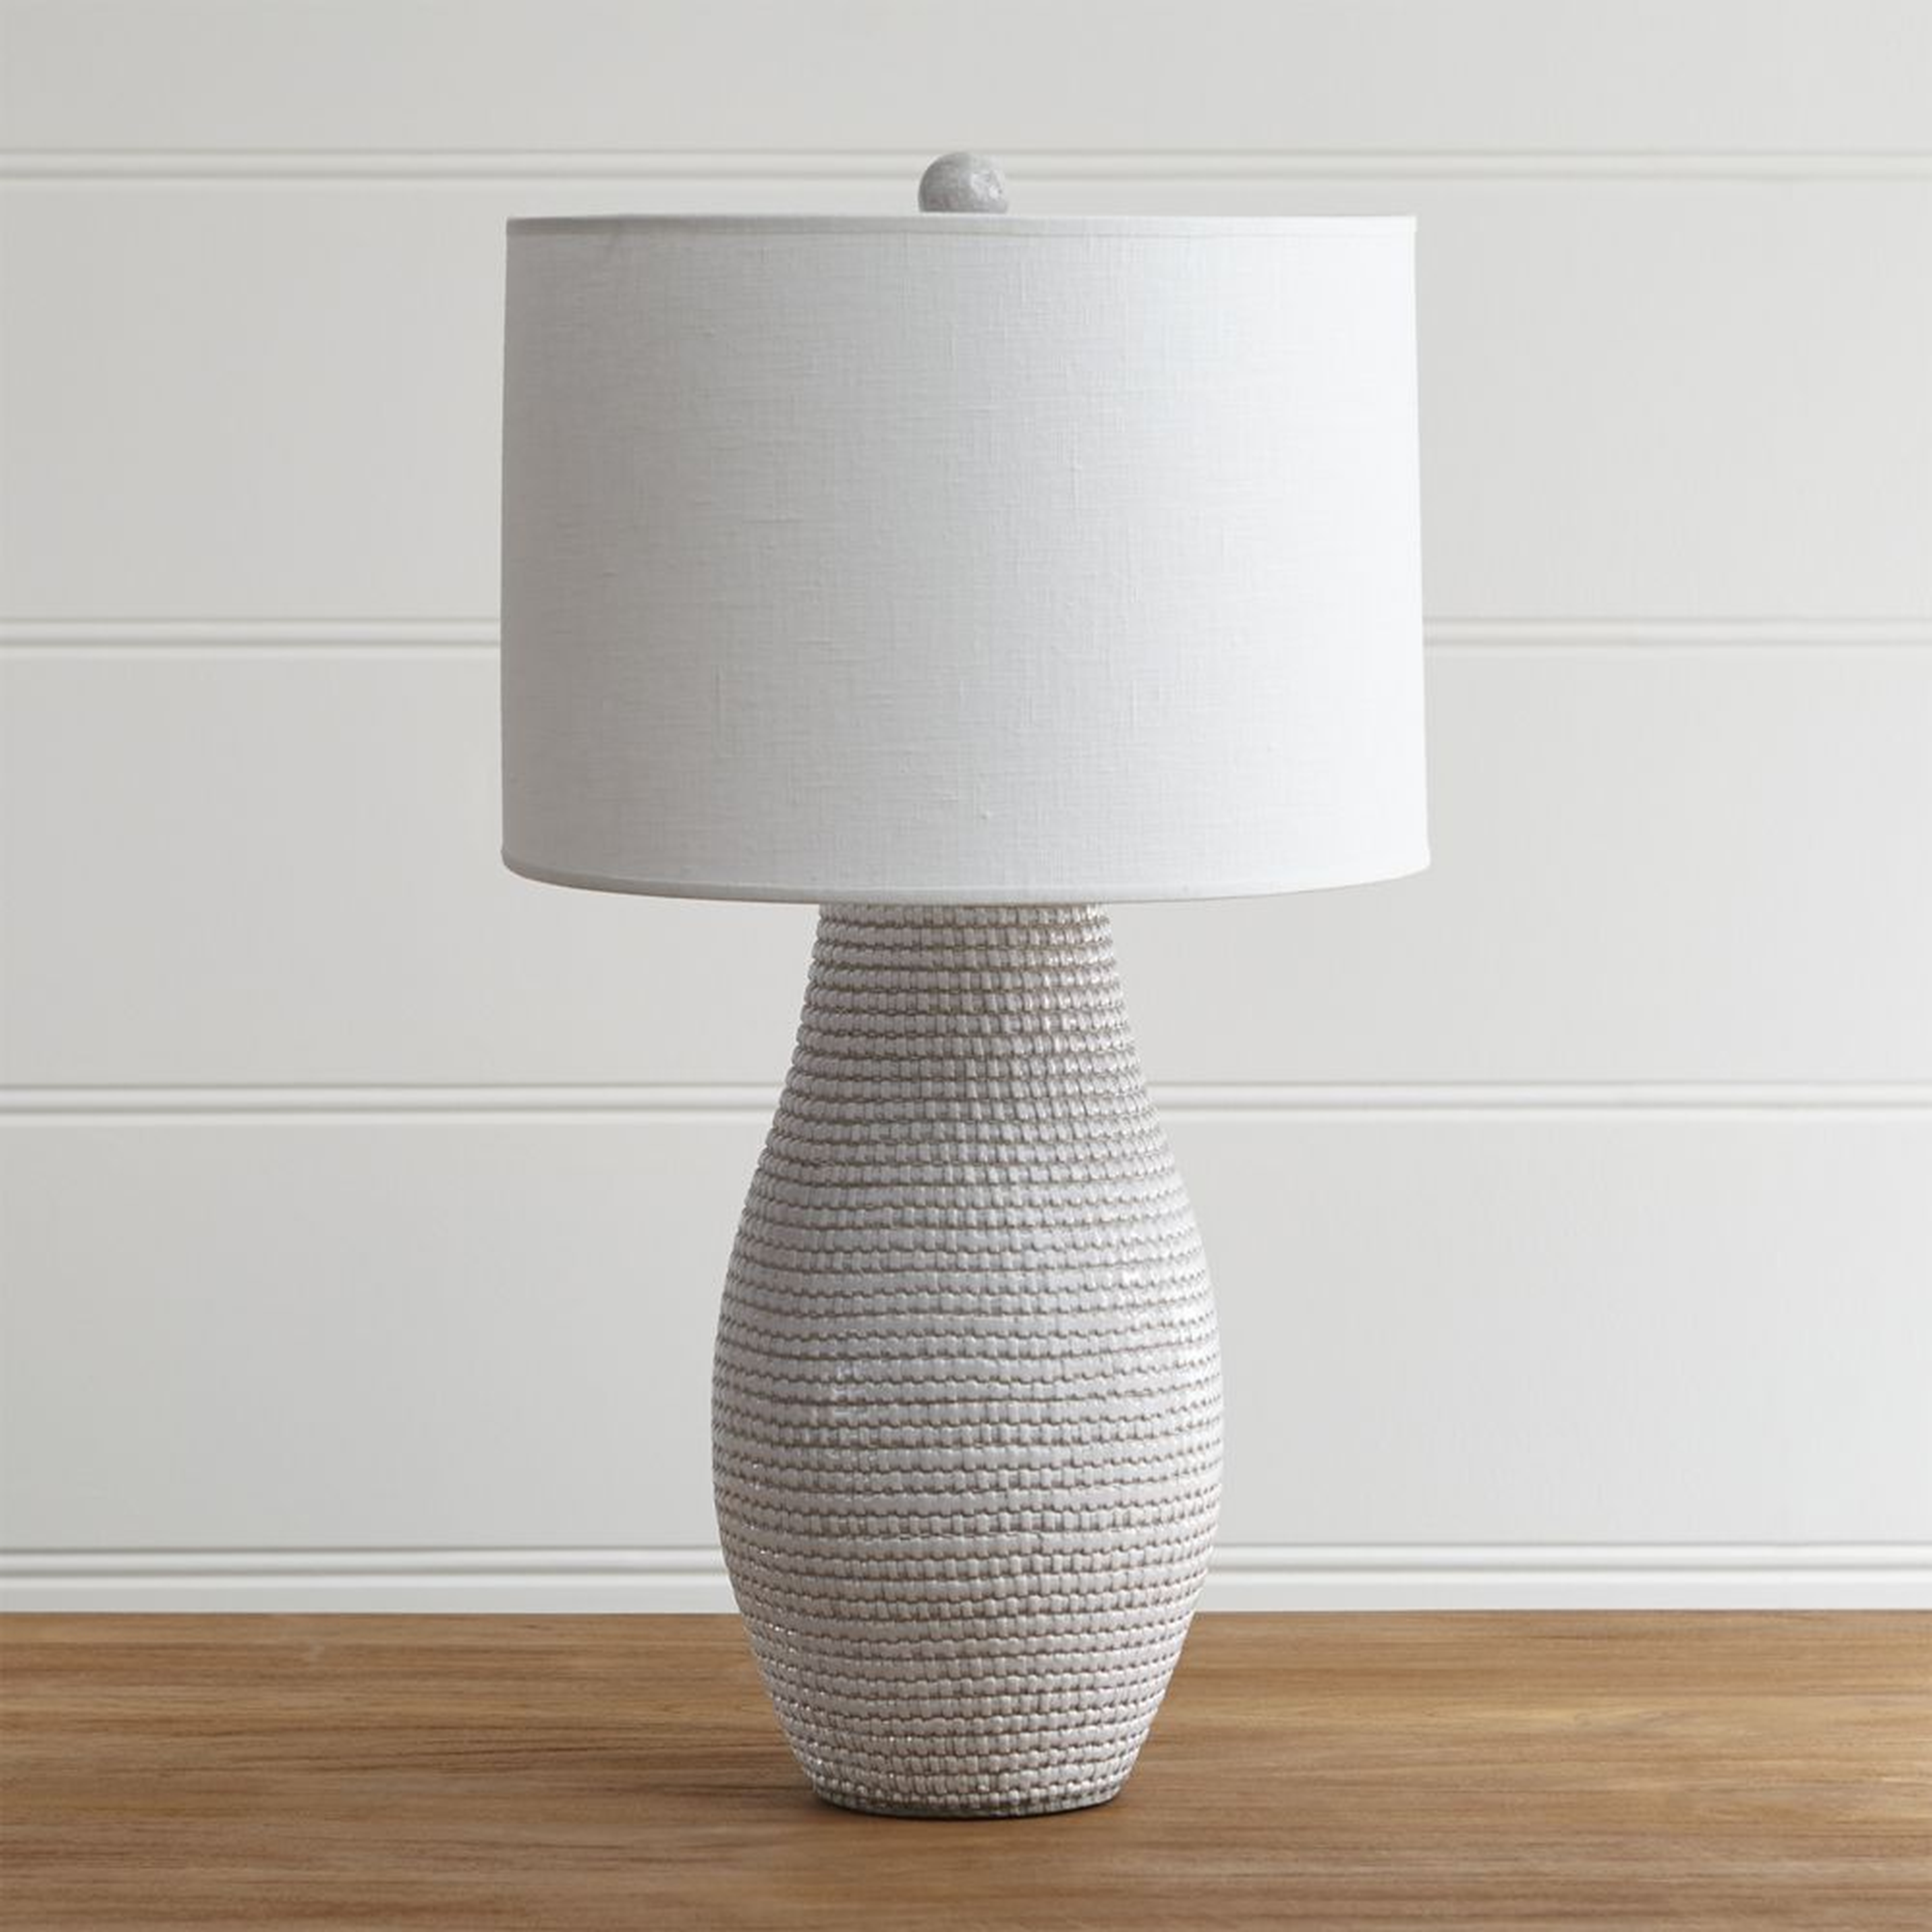 Cane White Table Lamp - Crate and Barrel